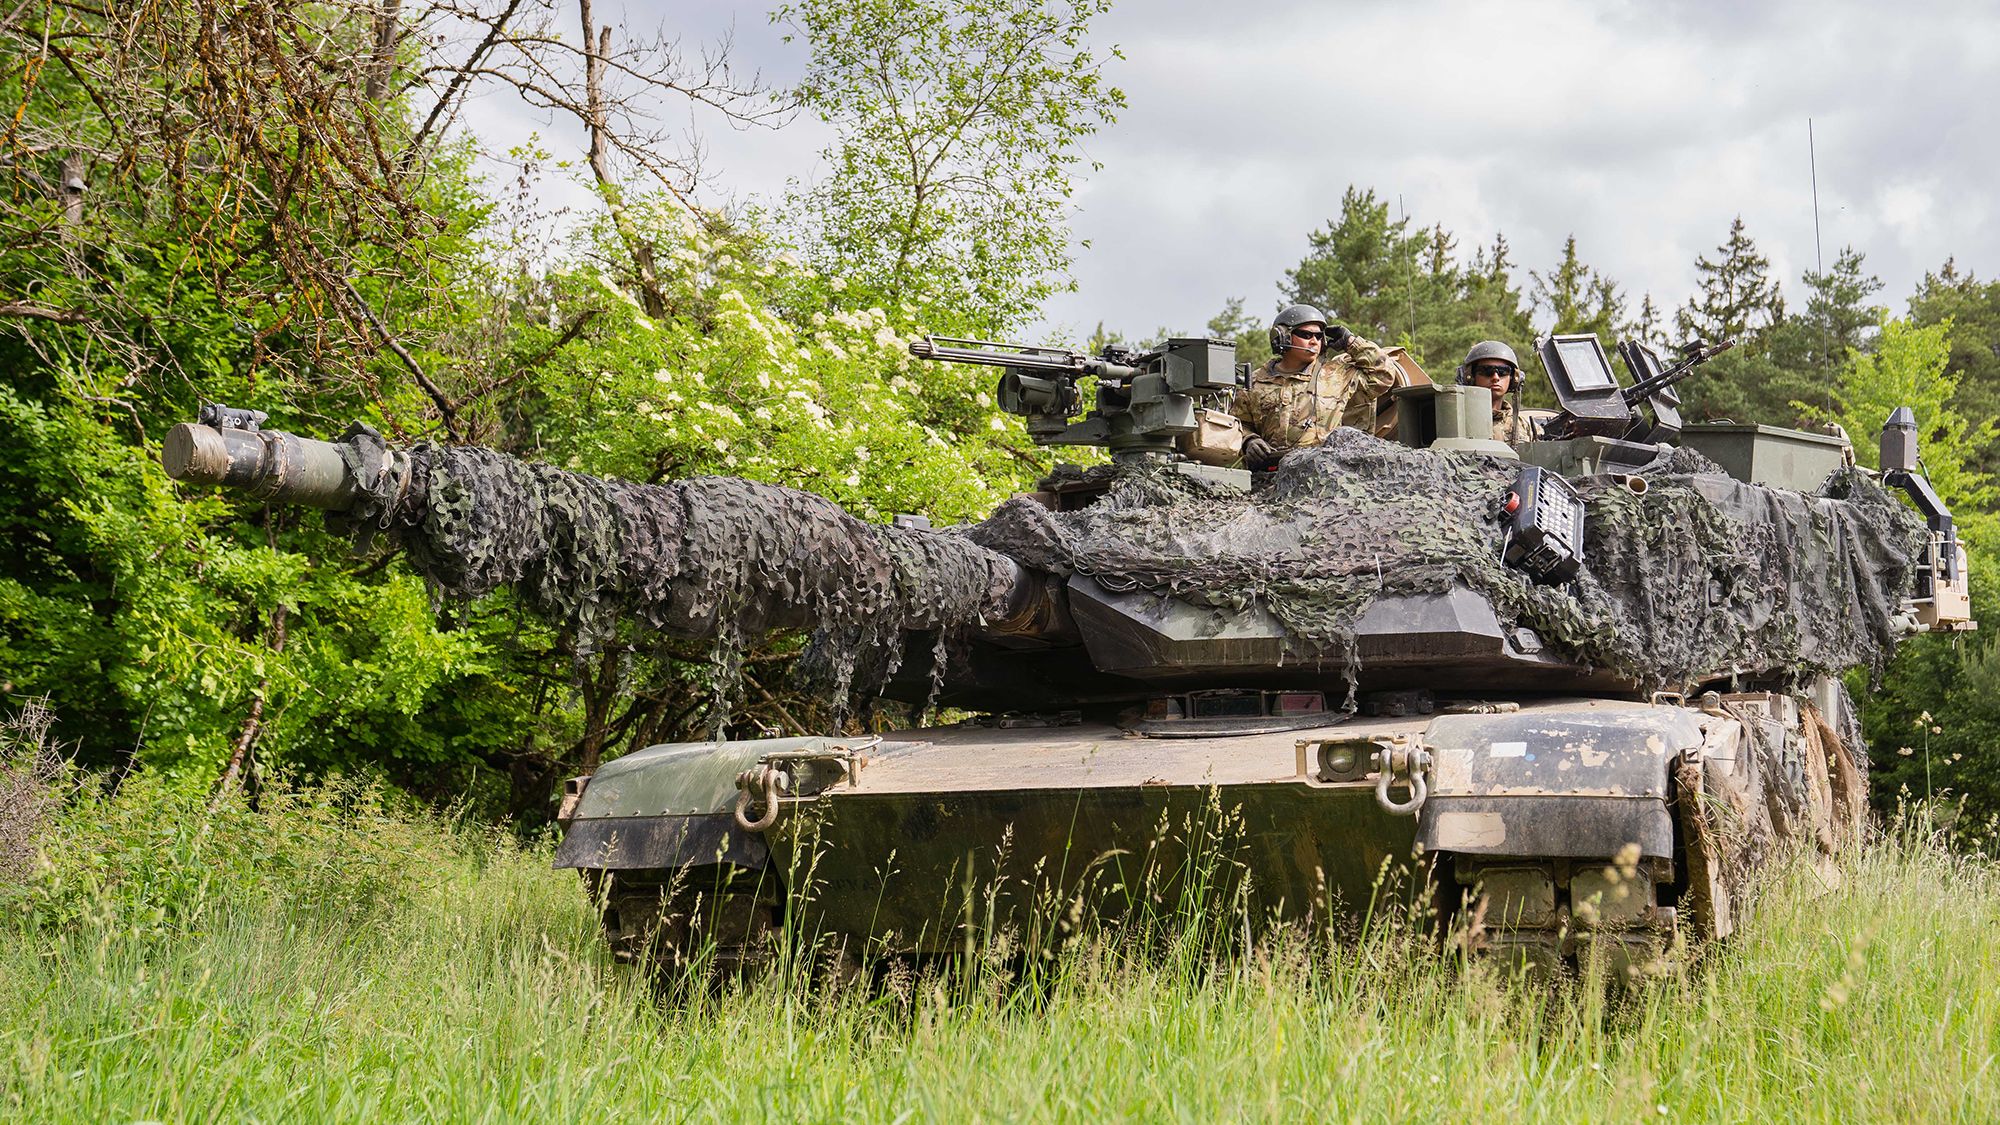 What are Abrams tanks and why is the US sending them to Ukraine?